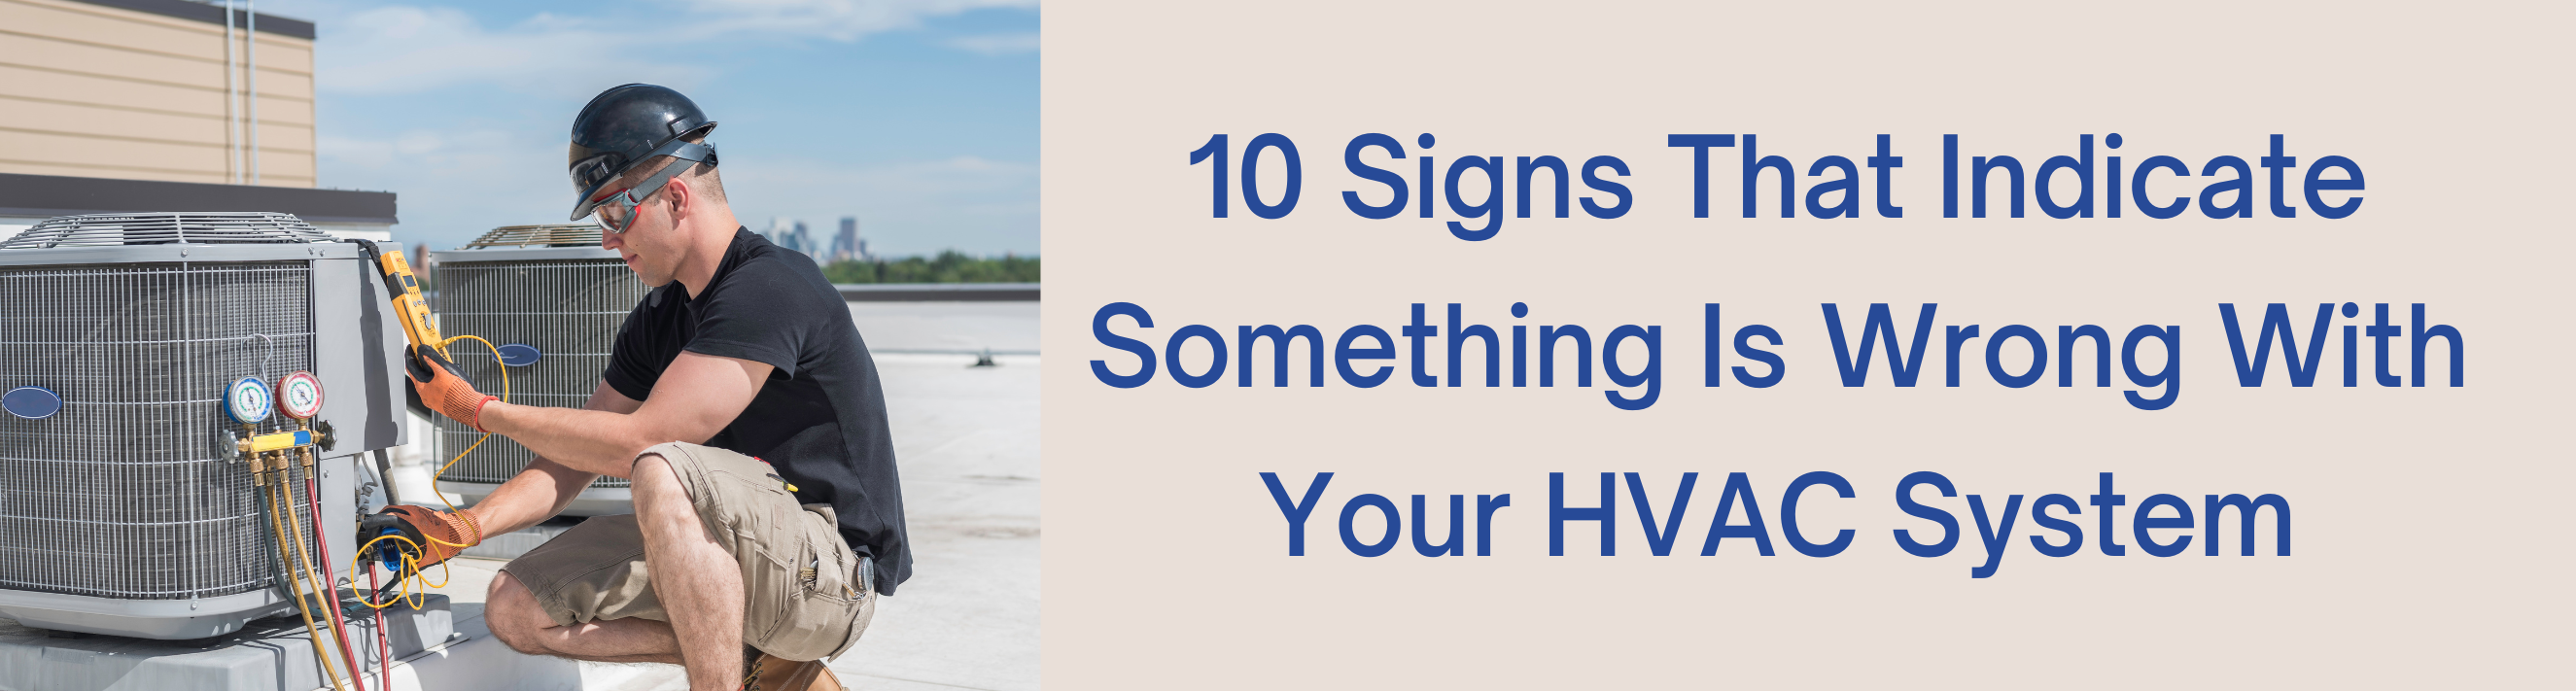 Image for 10 Signs That Indicate Something Is Wrong With Your HVAC System